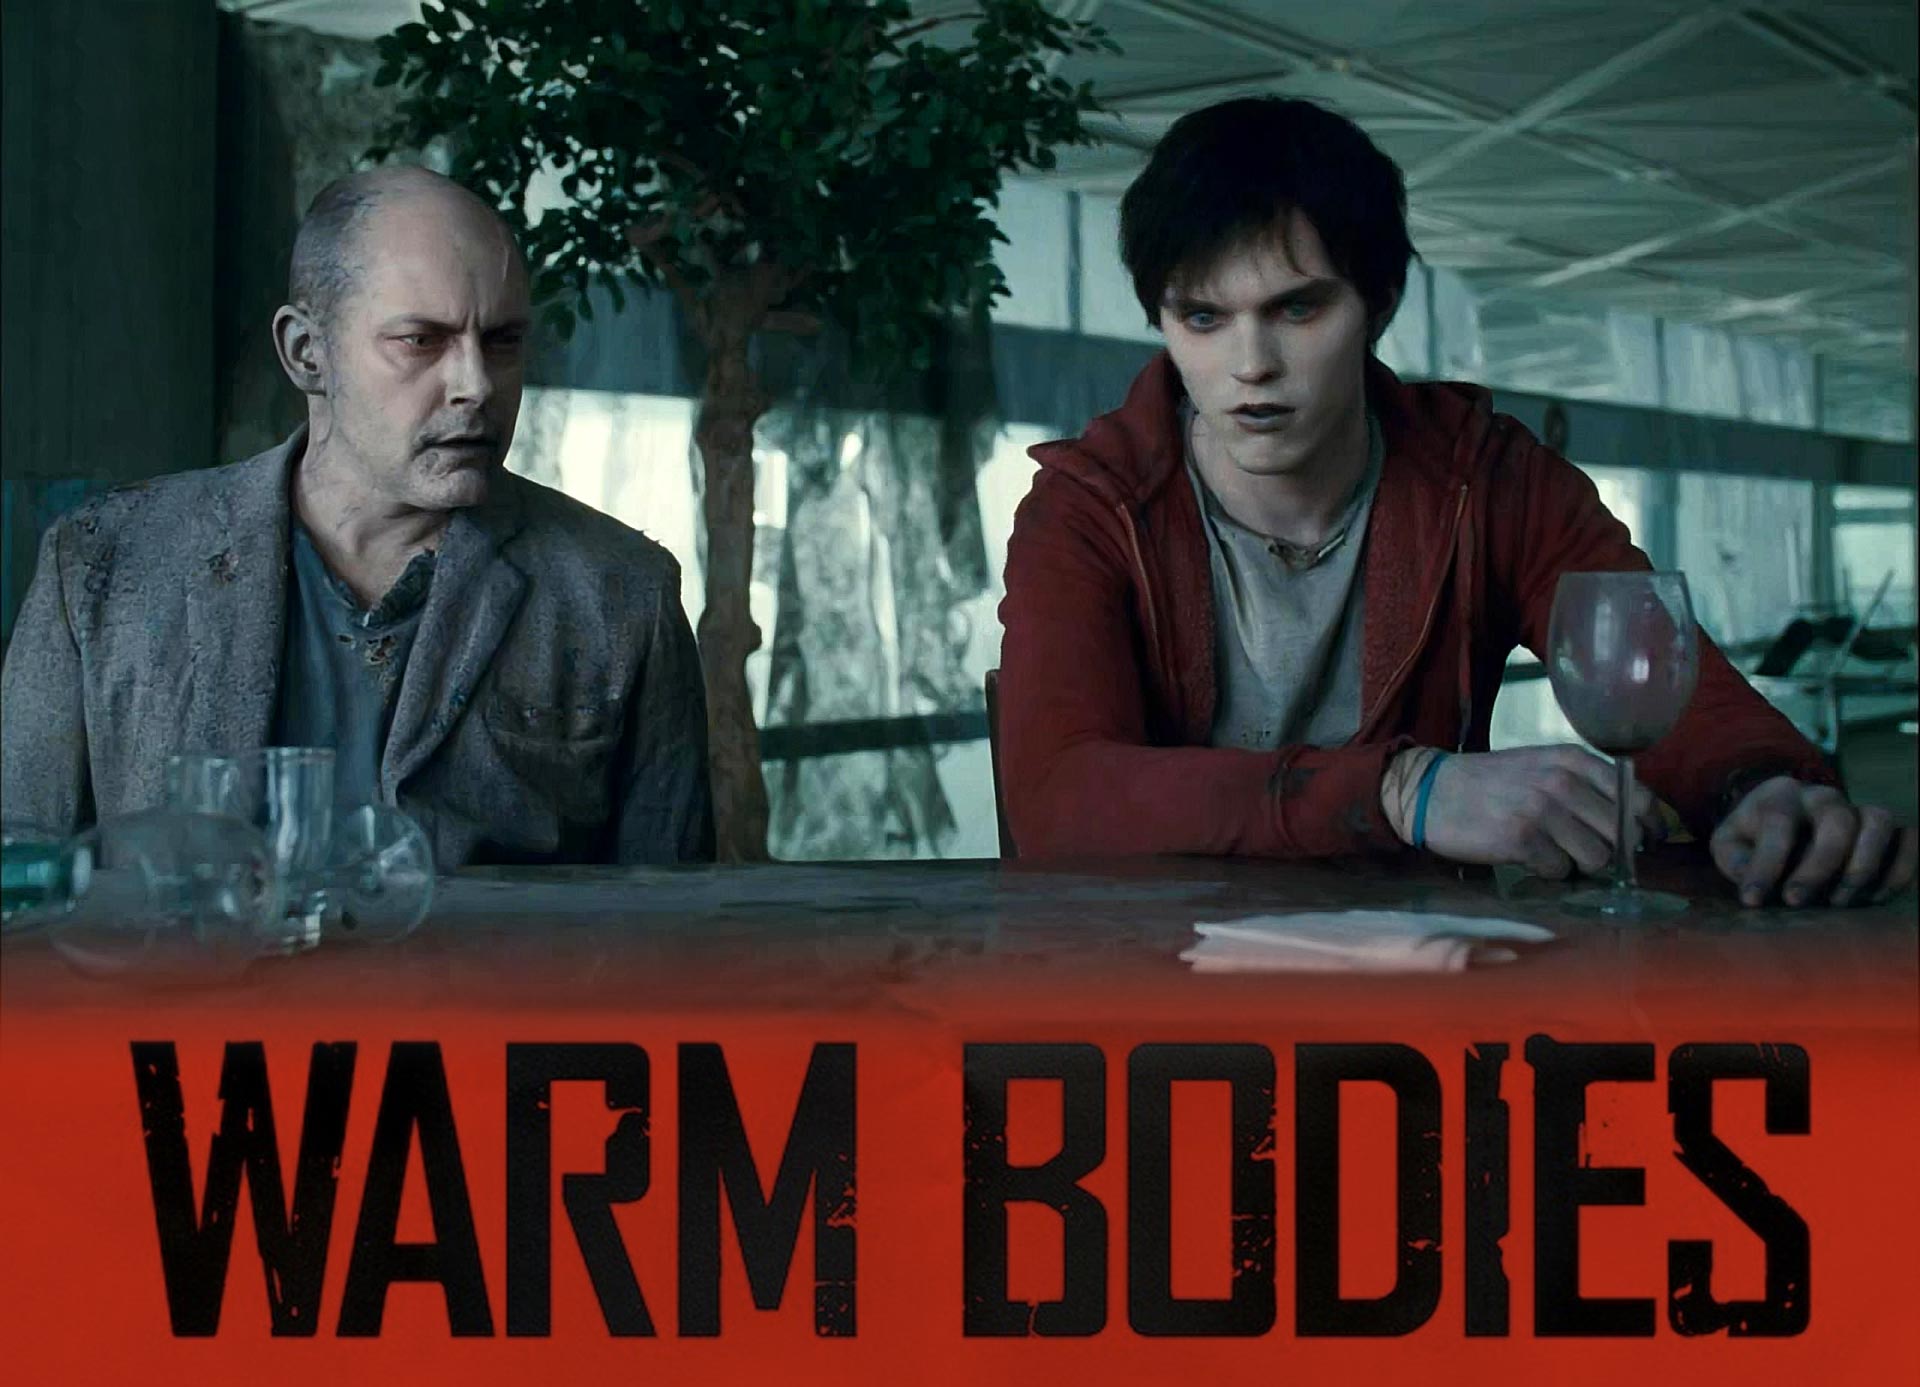 The First Trailer For WARM BODIES Has Arrived! - FilmoFilia